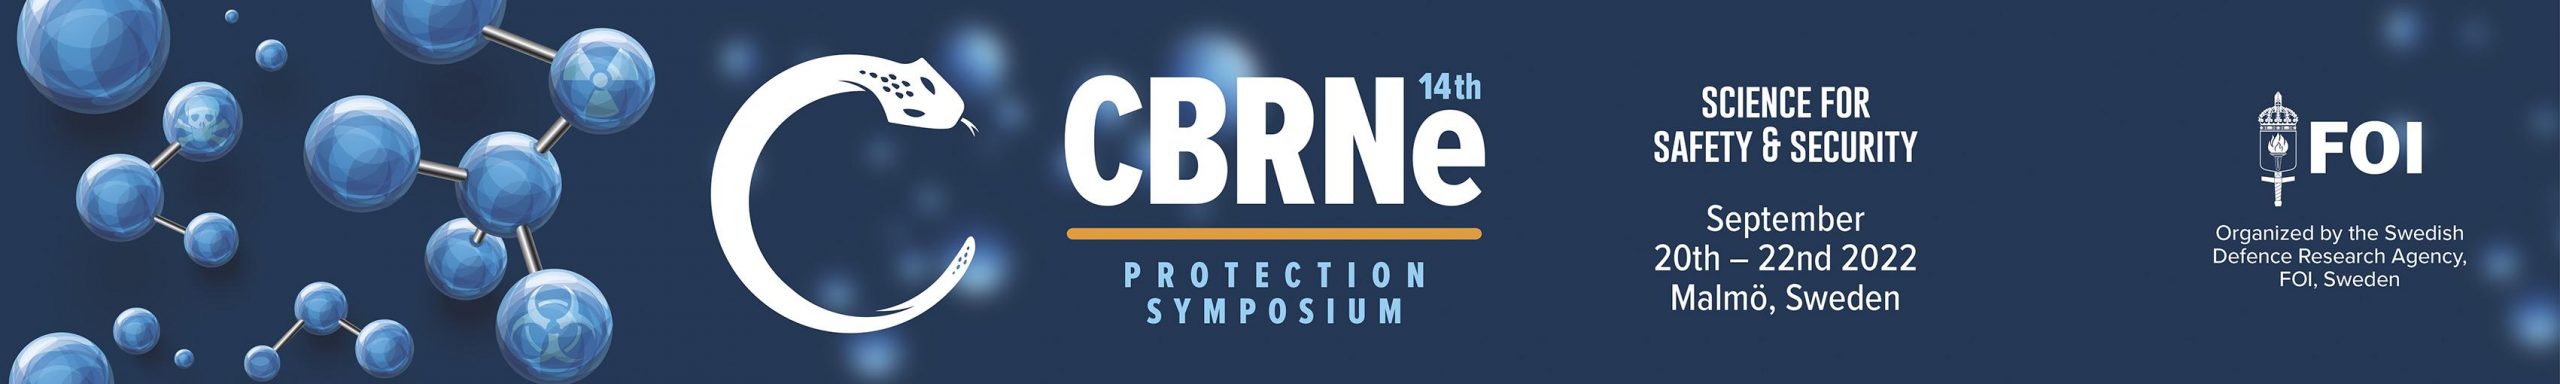 Banner for CBRNe protection symposium